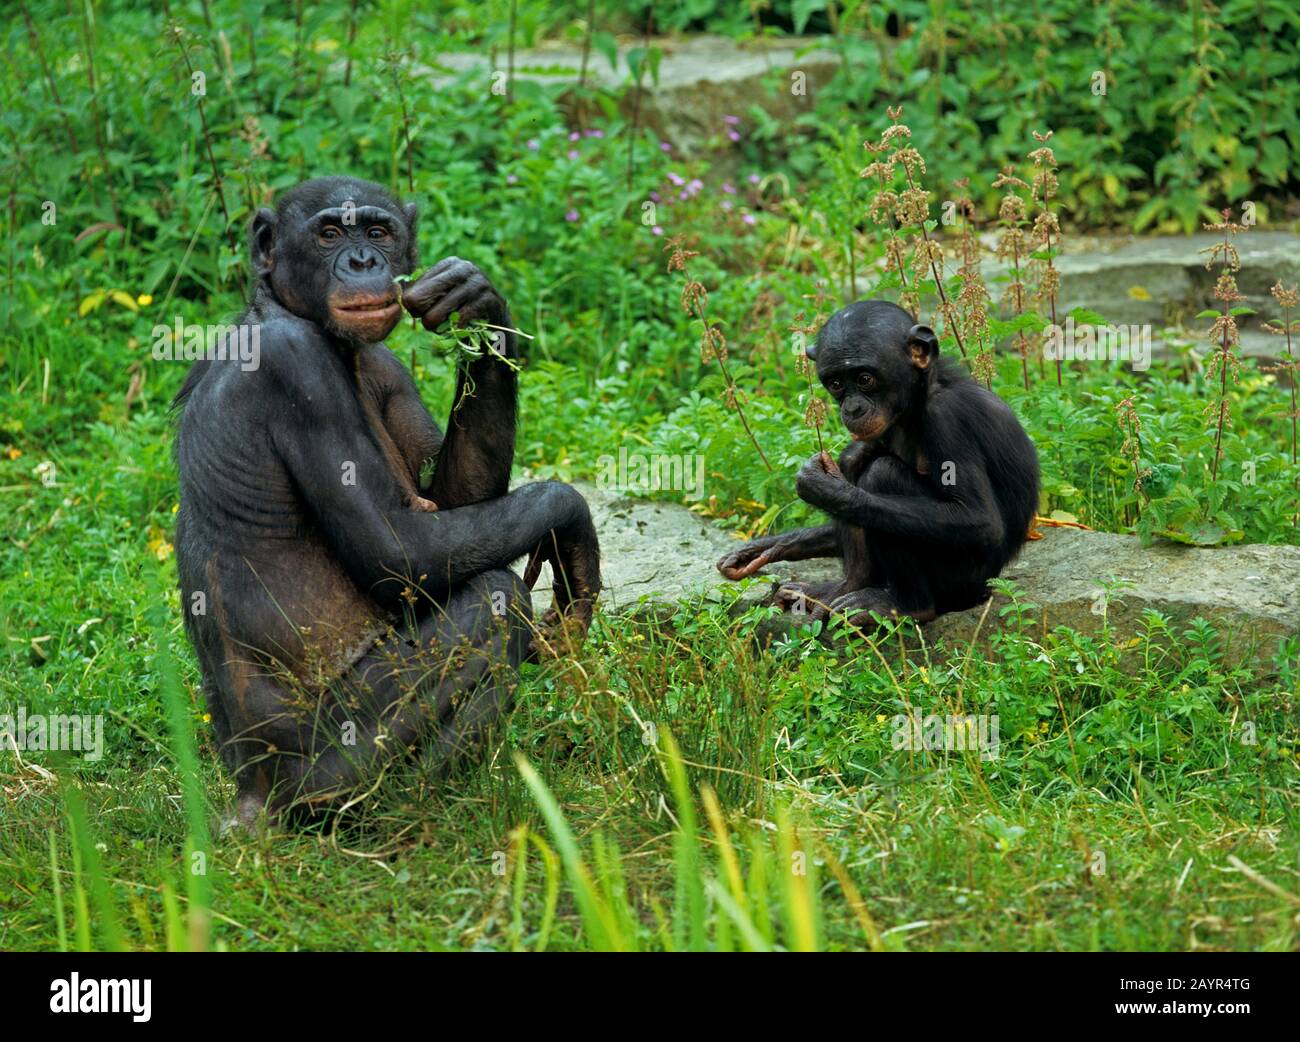 bonobo, pygmy chimpanzee (Pan paniscus), female chimpanzee squatting together with a young animal in a meadow Stock Photo